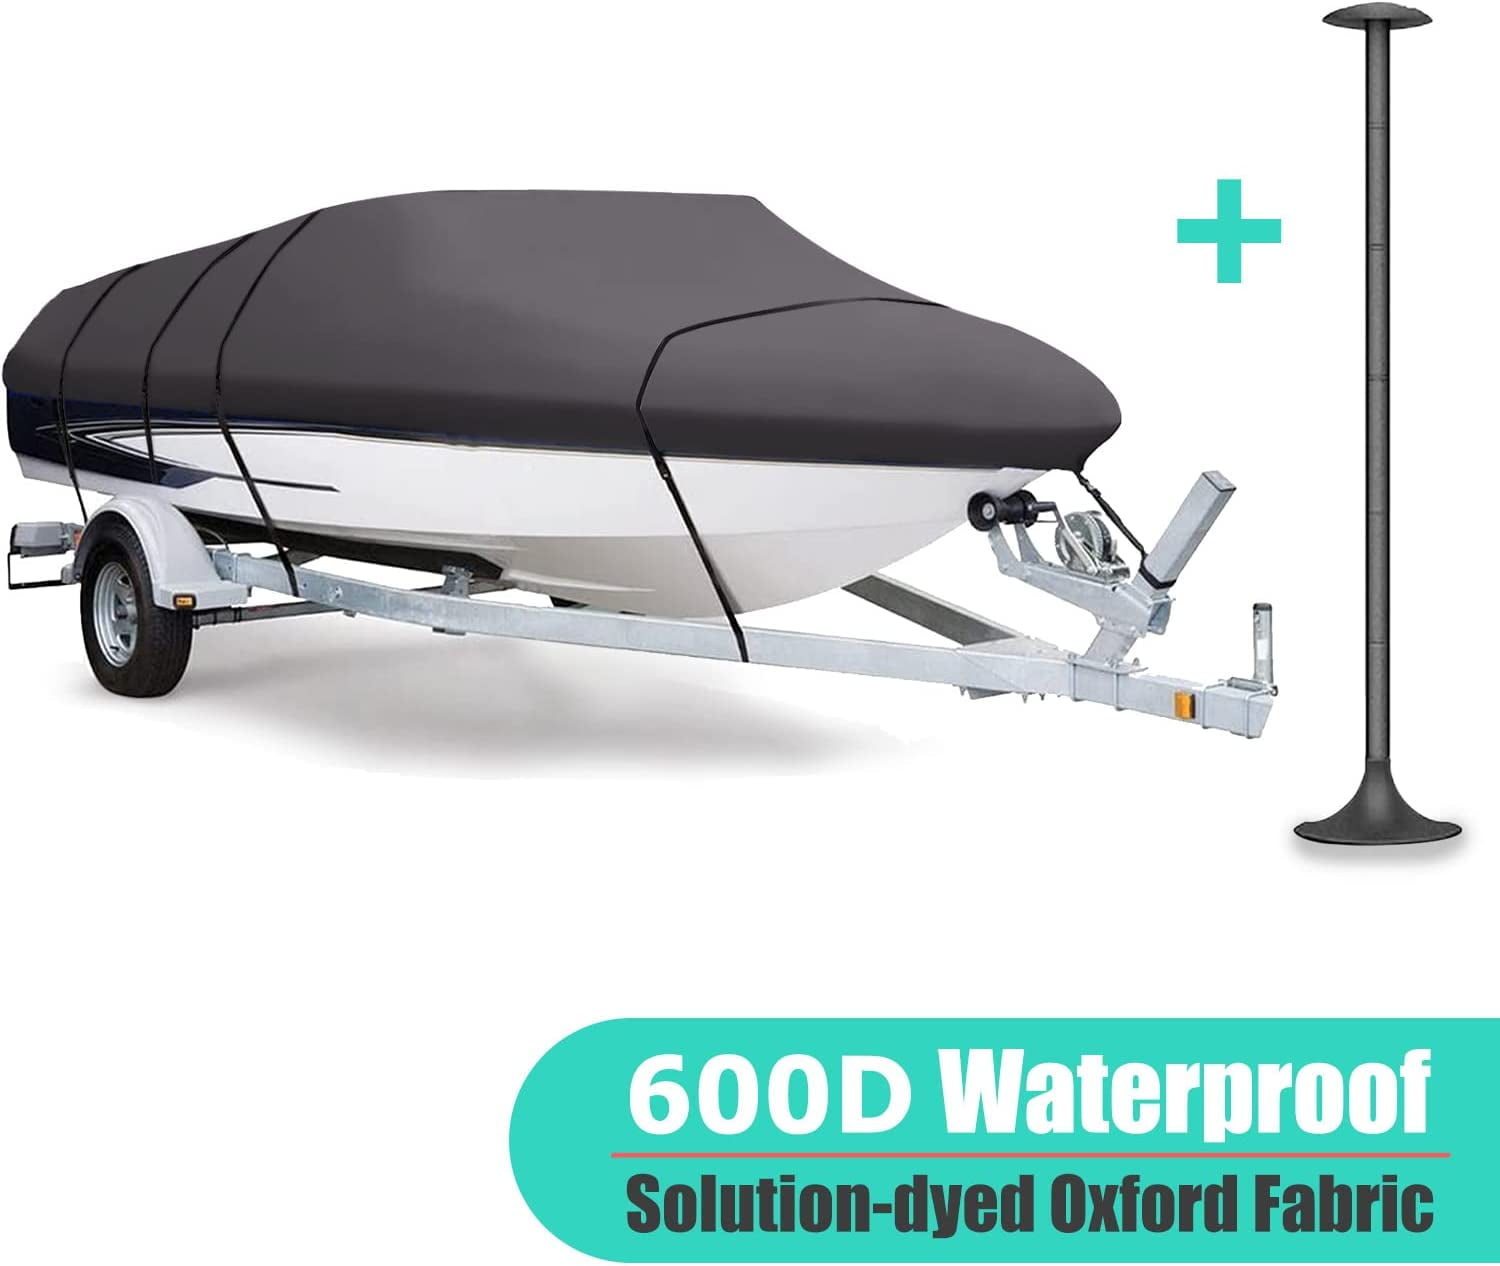 Fishing Boat for V-Hull Runabout Gray Boat Cover. Length:22'-24' Beam Width: up to 108 TRI-Hull XPORTION Trailerable Boat Cover Heavy Duty Waterproof 600D Oxford Fabric 